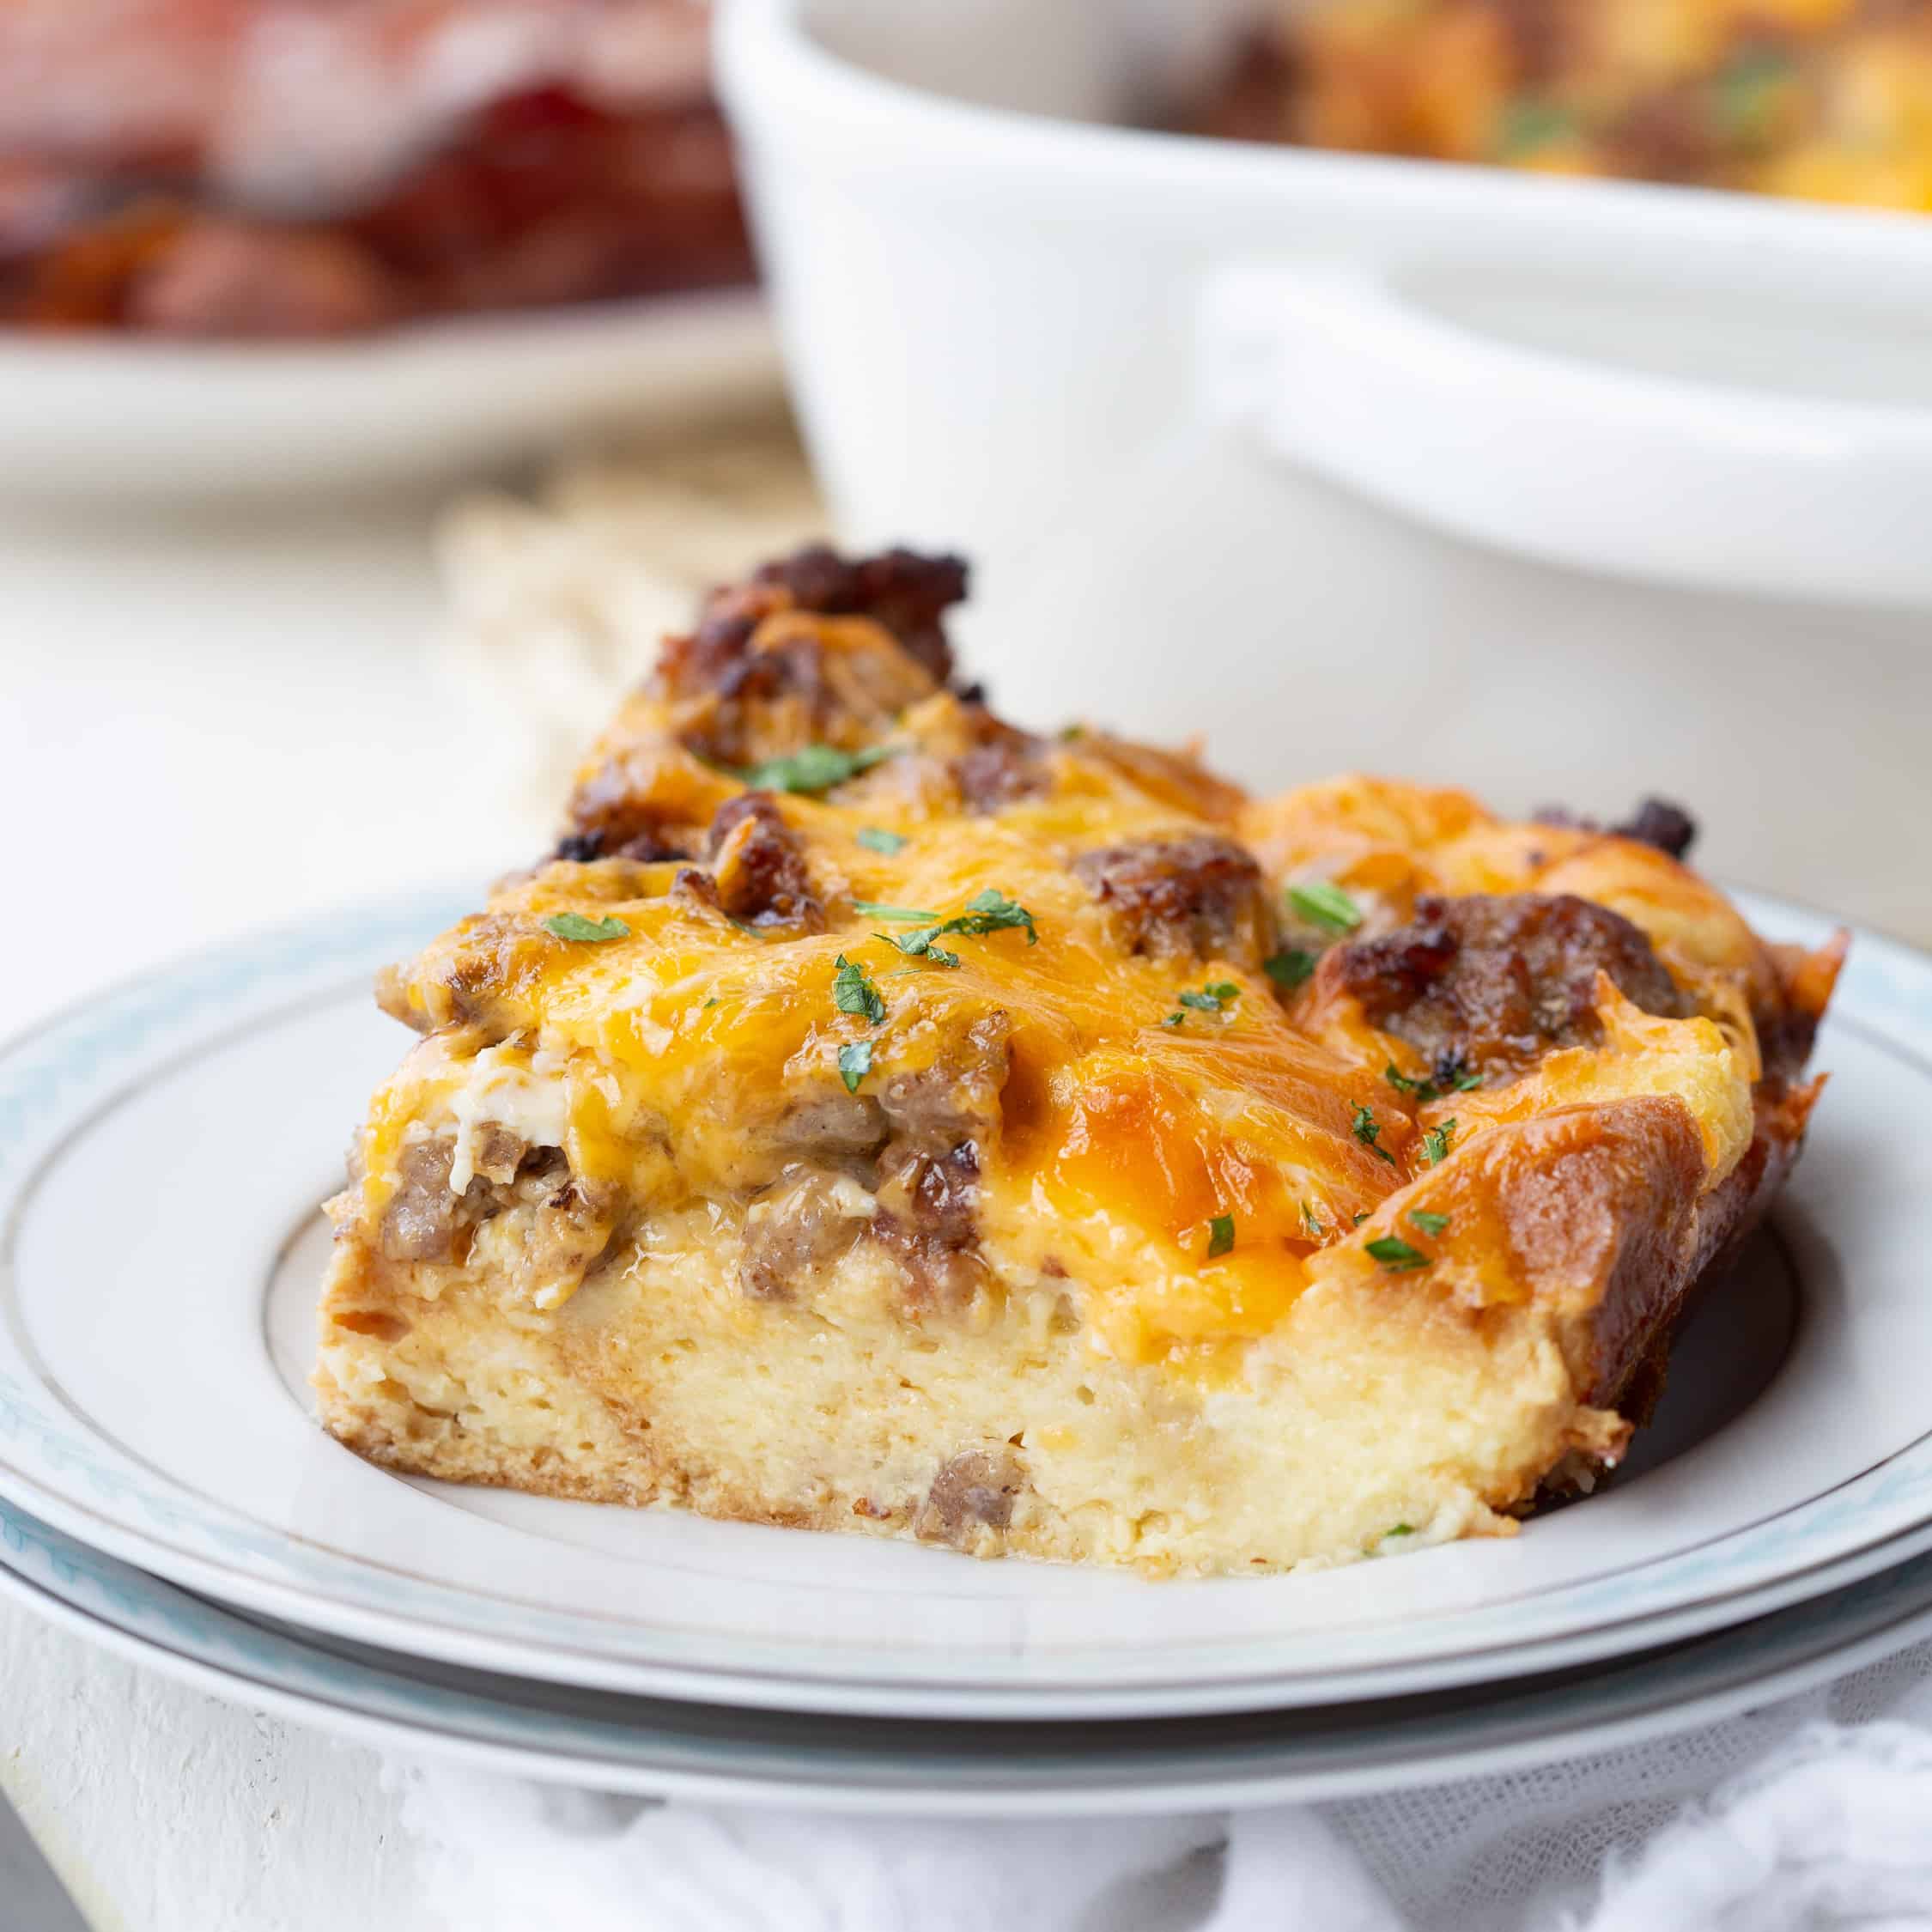 Sausage and Egg Breakfast Bake from Sage Street